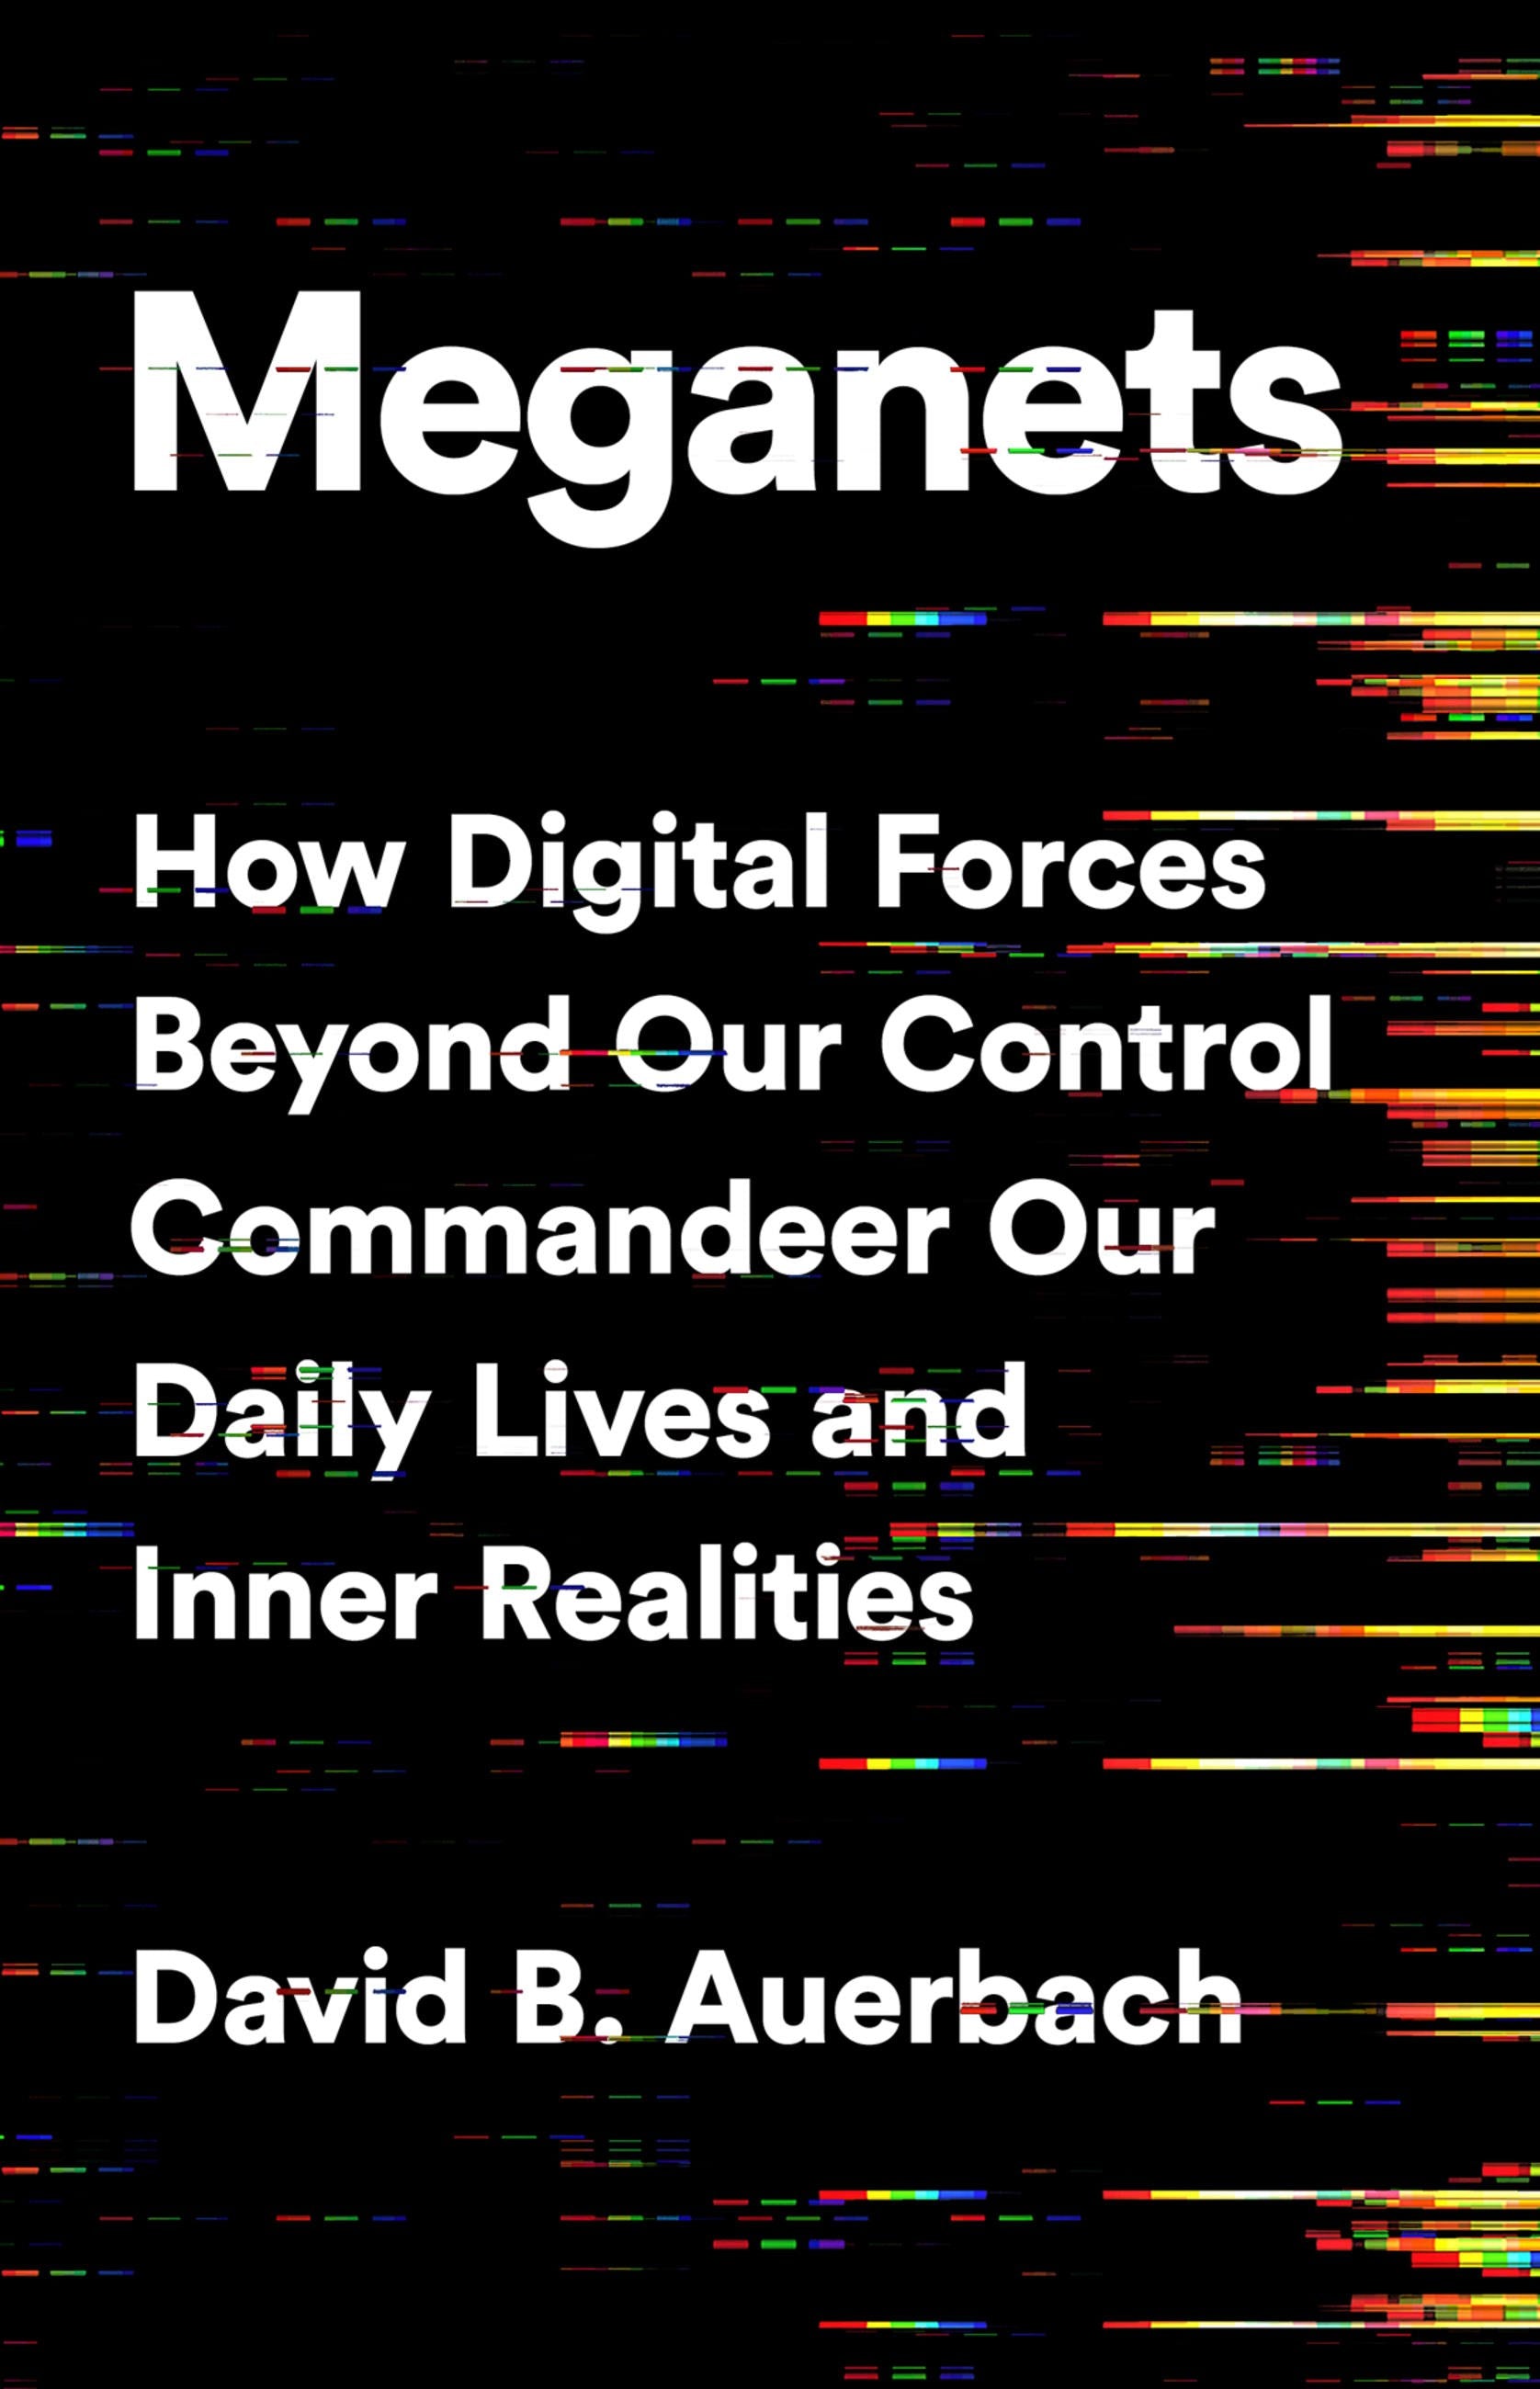 Meganets: How Digital Forces Beyond Our Control Commandeer Our Daily Lives and Inner Realities